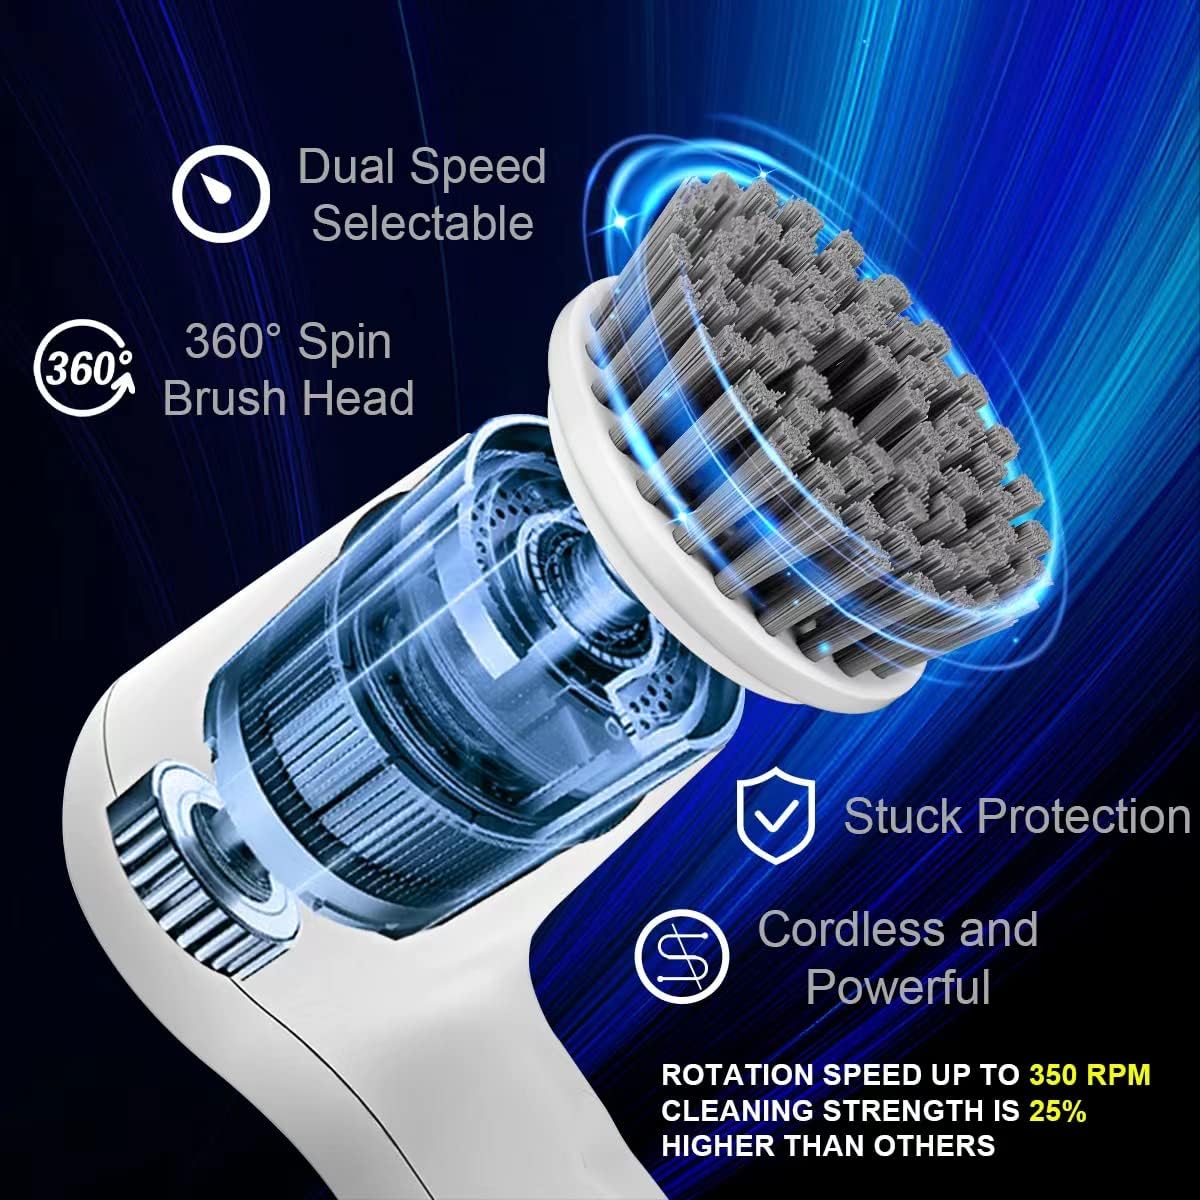 Electric Spin Scrubber, Power Scrubber Cordless Electric Shower Scrubber For Cleaning With Led Display, For Bathroom, Tub, Kitchen Stove, Tile Grout With 4 Brush Heads (White)